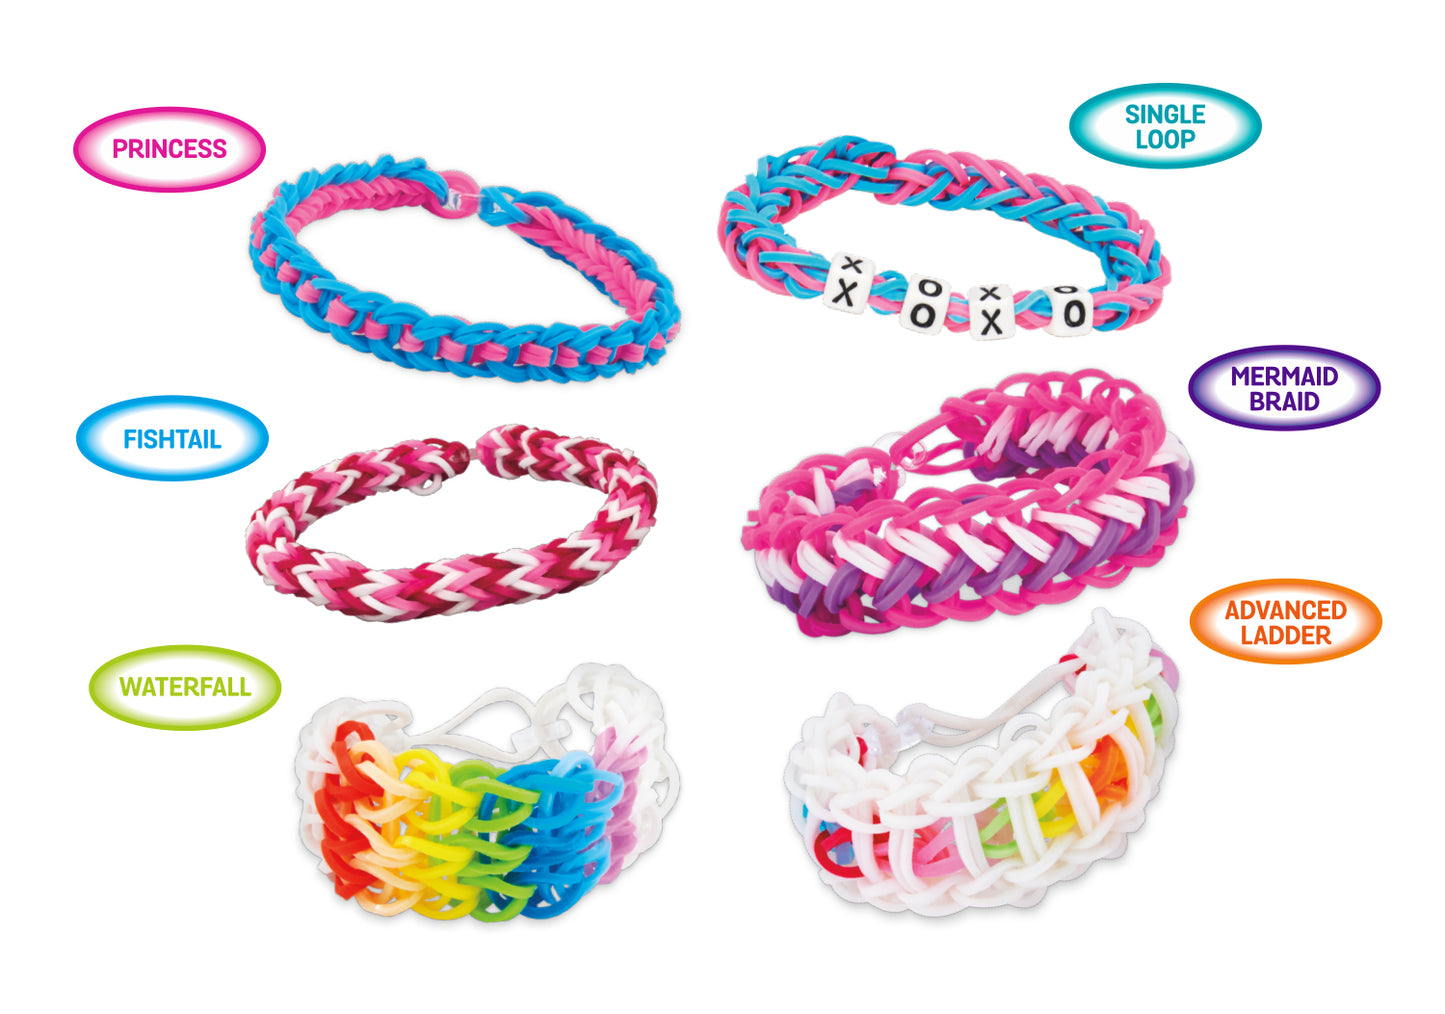 Cra-Z-Art Be Inspired Cra-Z-Loom 3 in 1 Rubber Band Bracelet Extravaganza